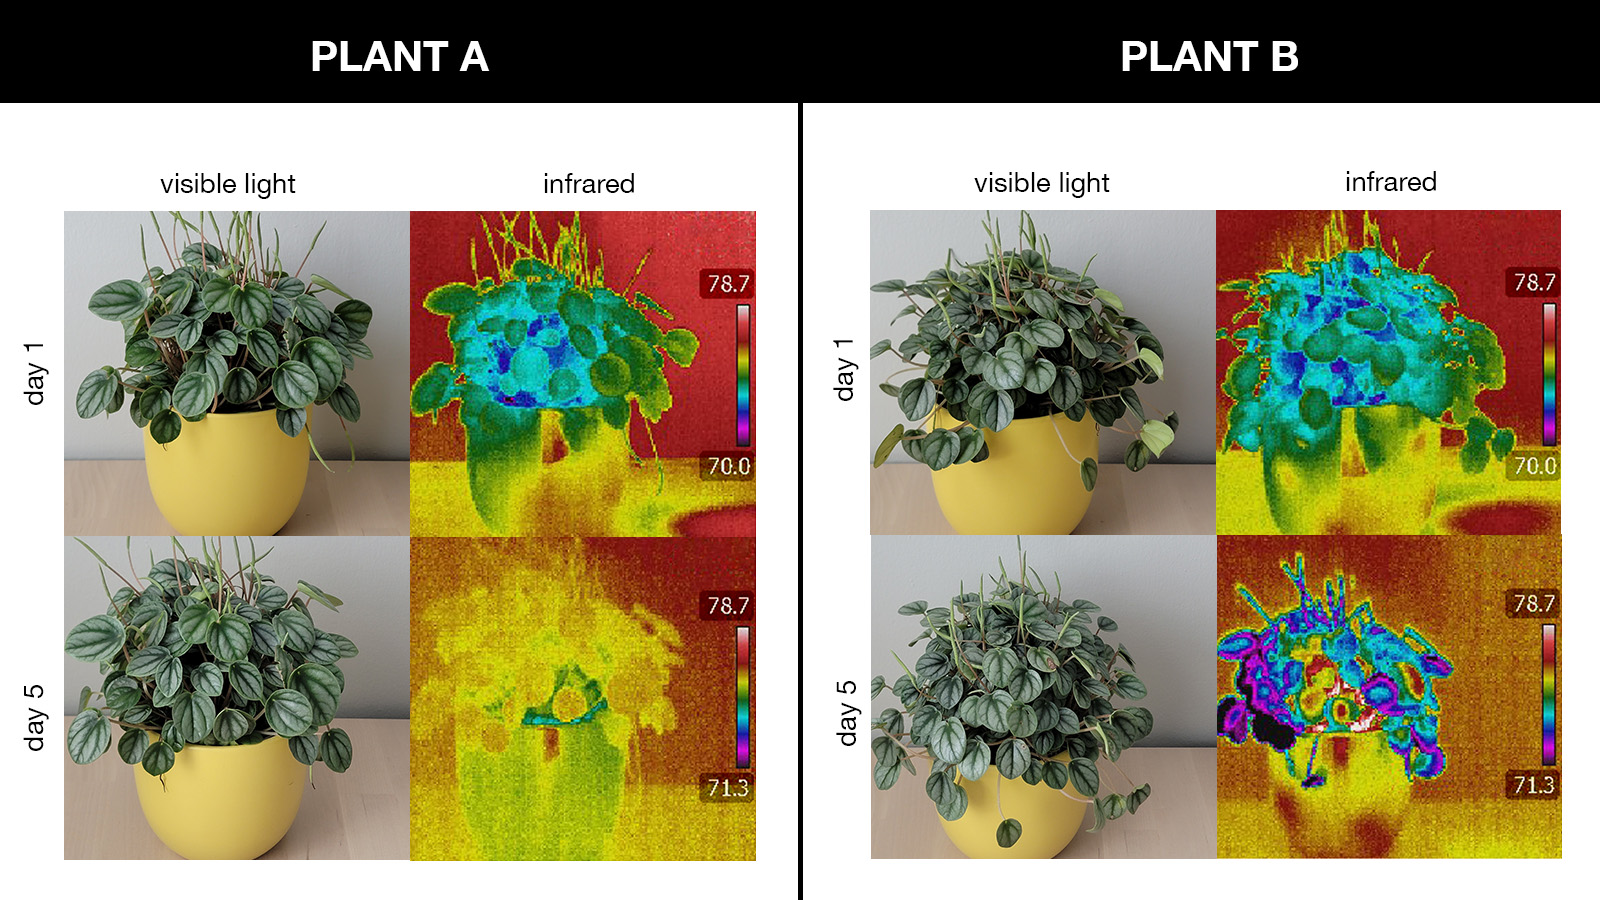 Both plants look the same on Day 1 and 5 of the experiment when viewed in visible light. The temperature scale shown on the infrared view of each plant ranges from 78.7 degrees at the max to 71.3 degrees at the min (represented by a color scale going from white to red to yellow to green to blue to purple to black, respectively). While Plant A went to the warmer end of the temperature scale on Day 5 compared with Day 1, Plant B appears to be much cooler, with some edges of the leaves completely black in infrared.